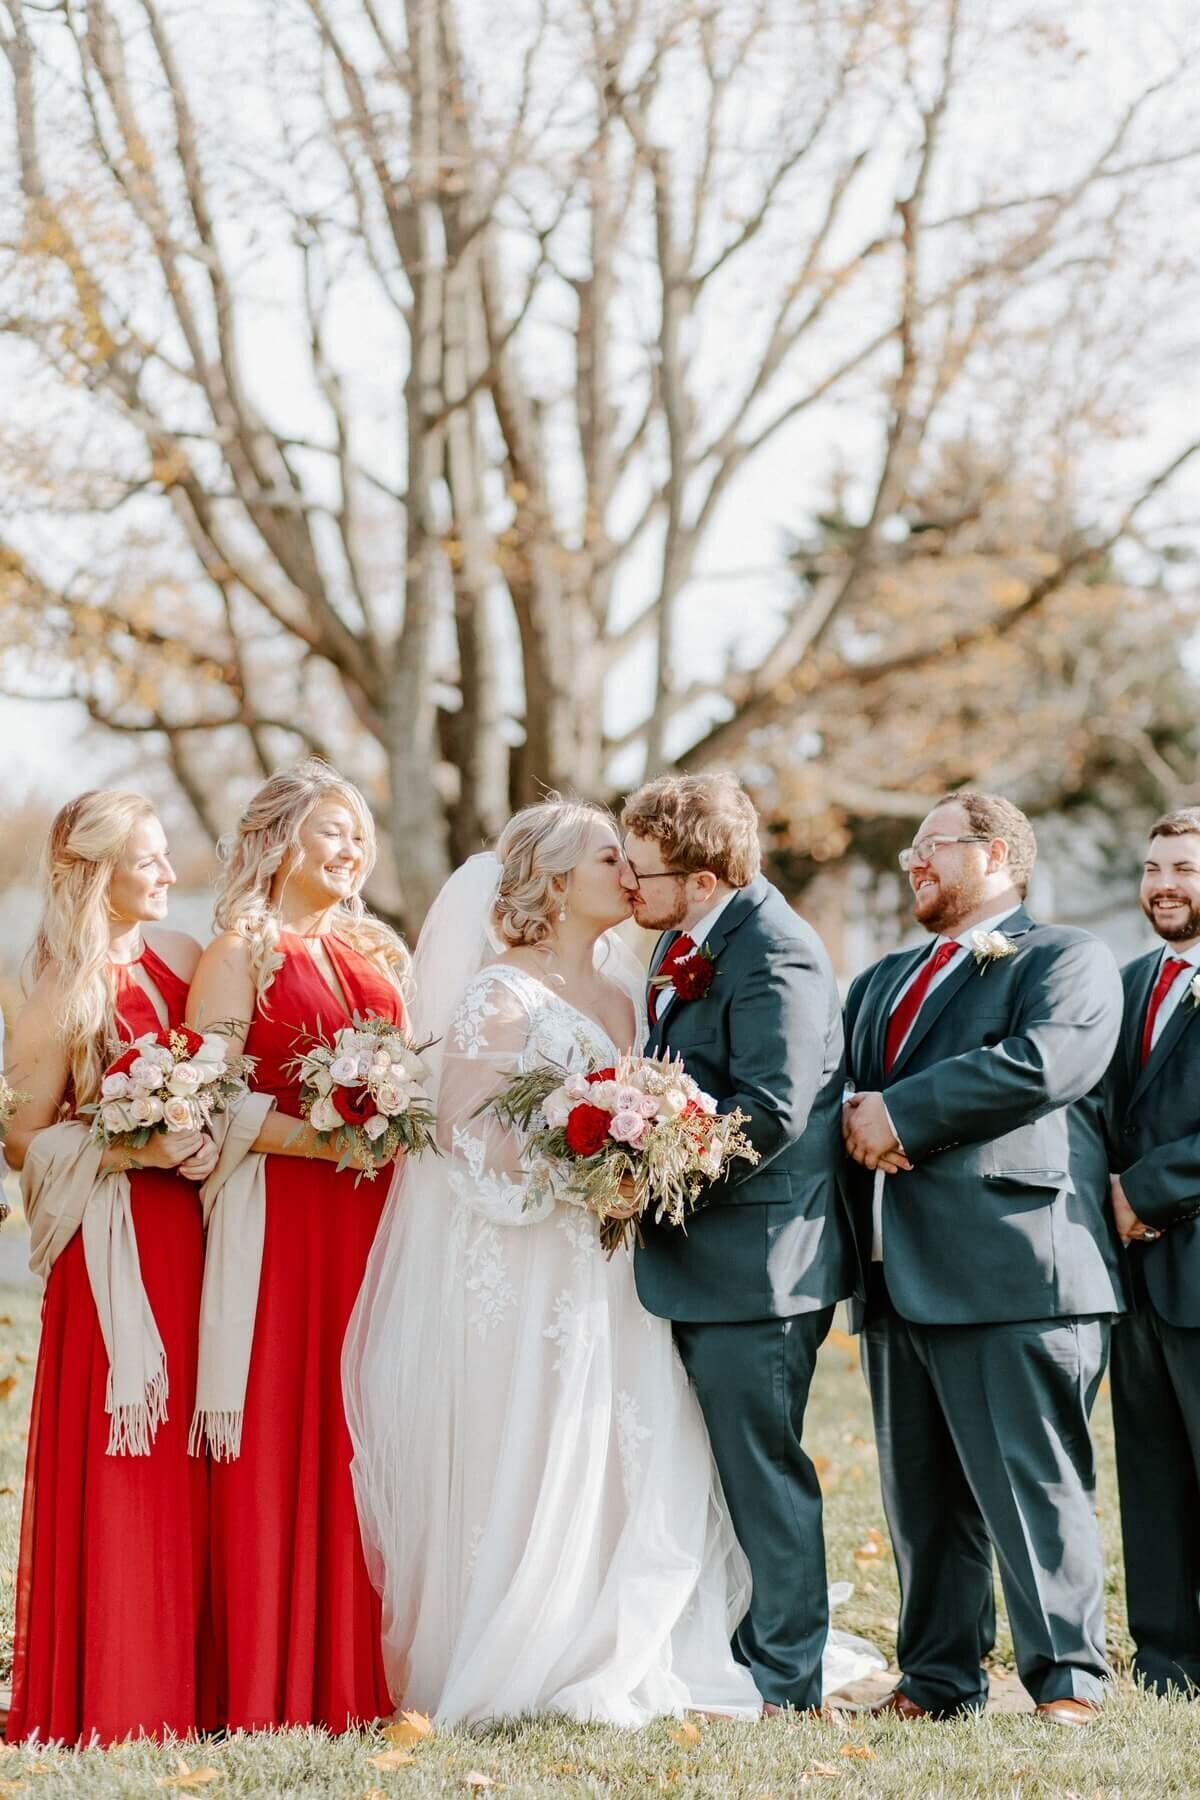 18-kara-loryn-photography-bride-and-groom-surrounded-by-wedding-party